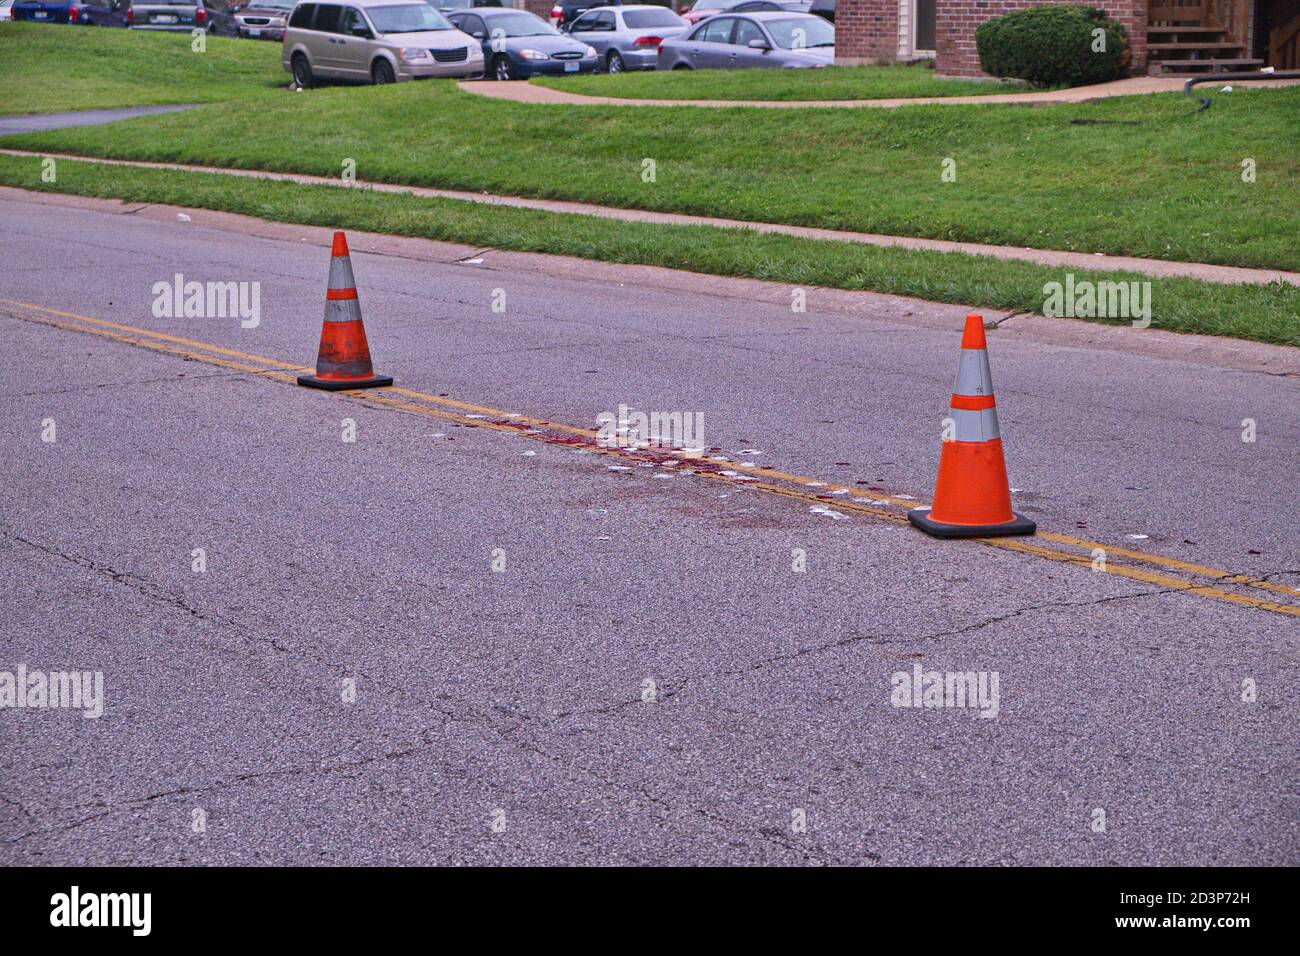 The location on Canfield Drive in Ferguson, Missouri where Michael Brown was shot by Ferguson officer Darren Wilson. The two safety cones indicate the location of his head and feet. Stock Photo